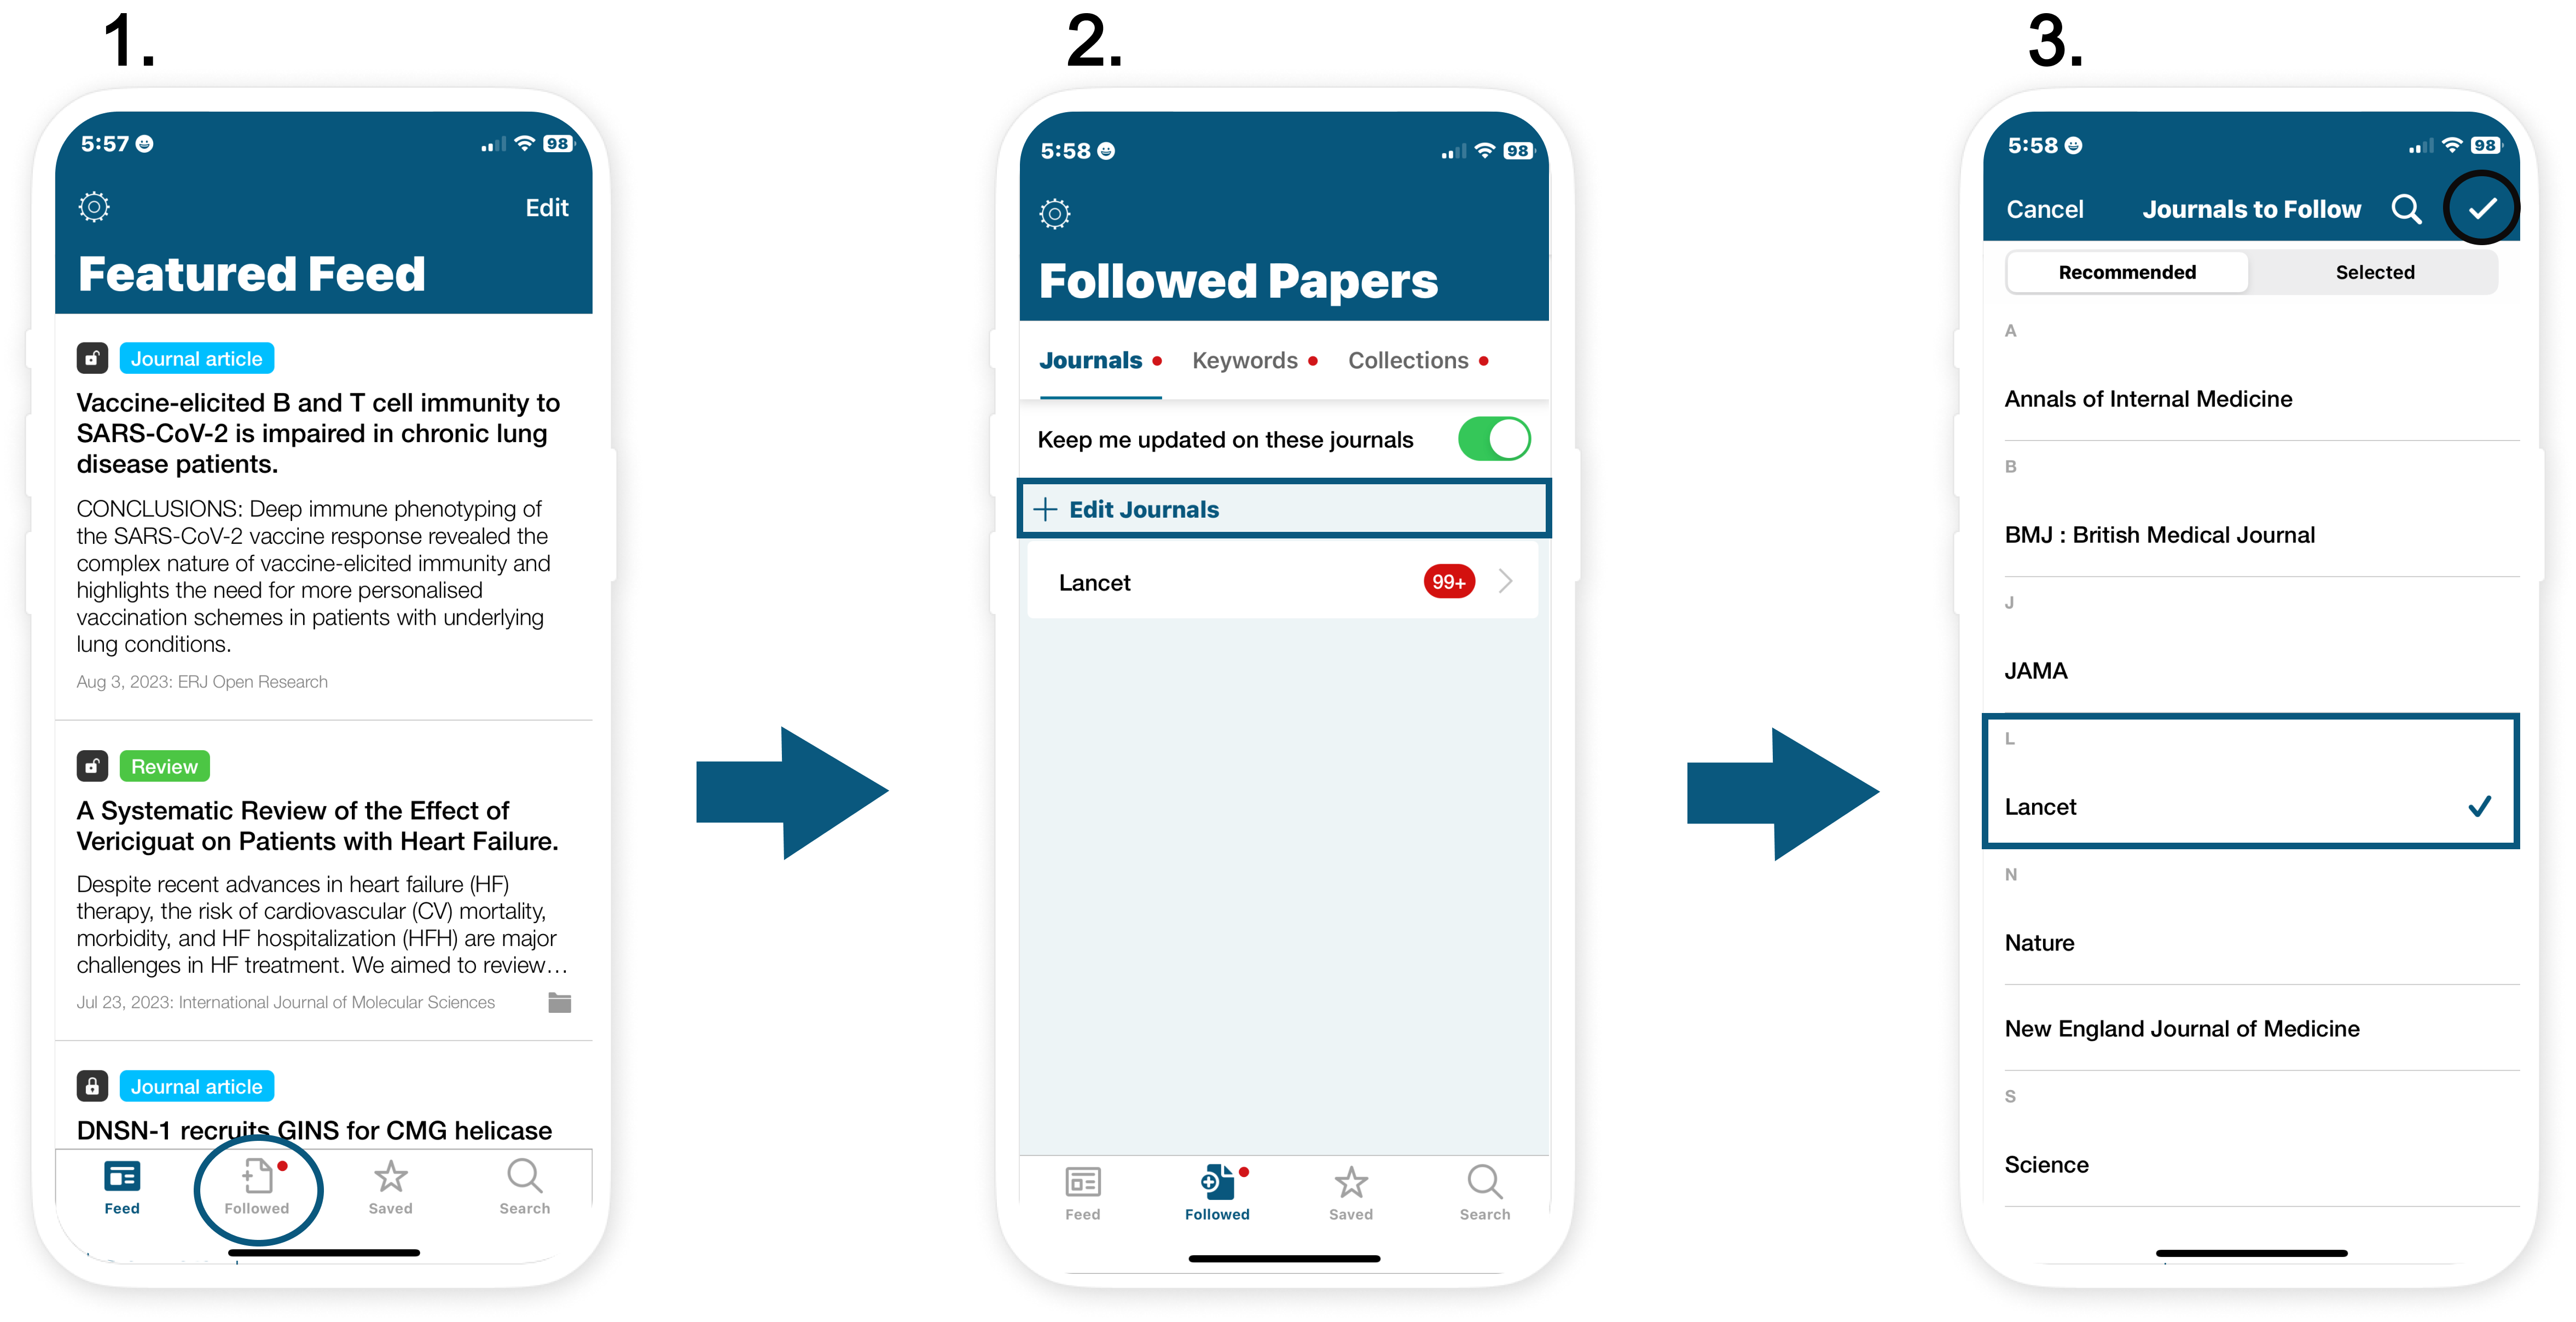 Add Remove Journals From My Followed Journals - iPhone(1).png